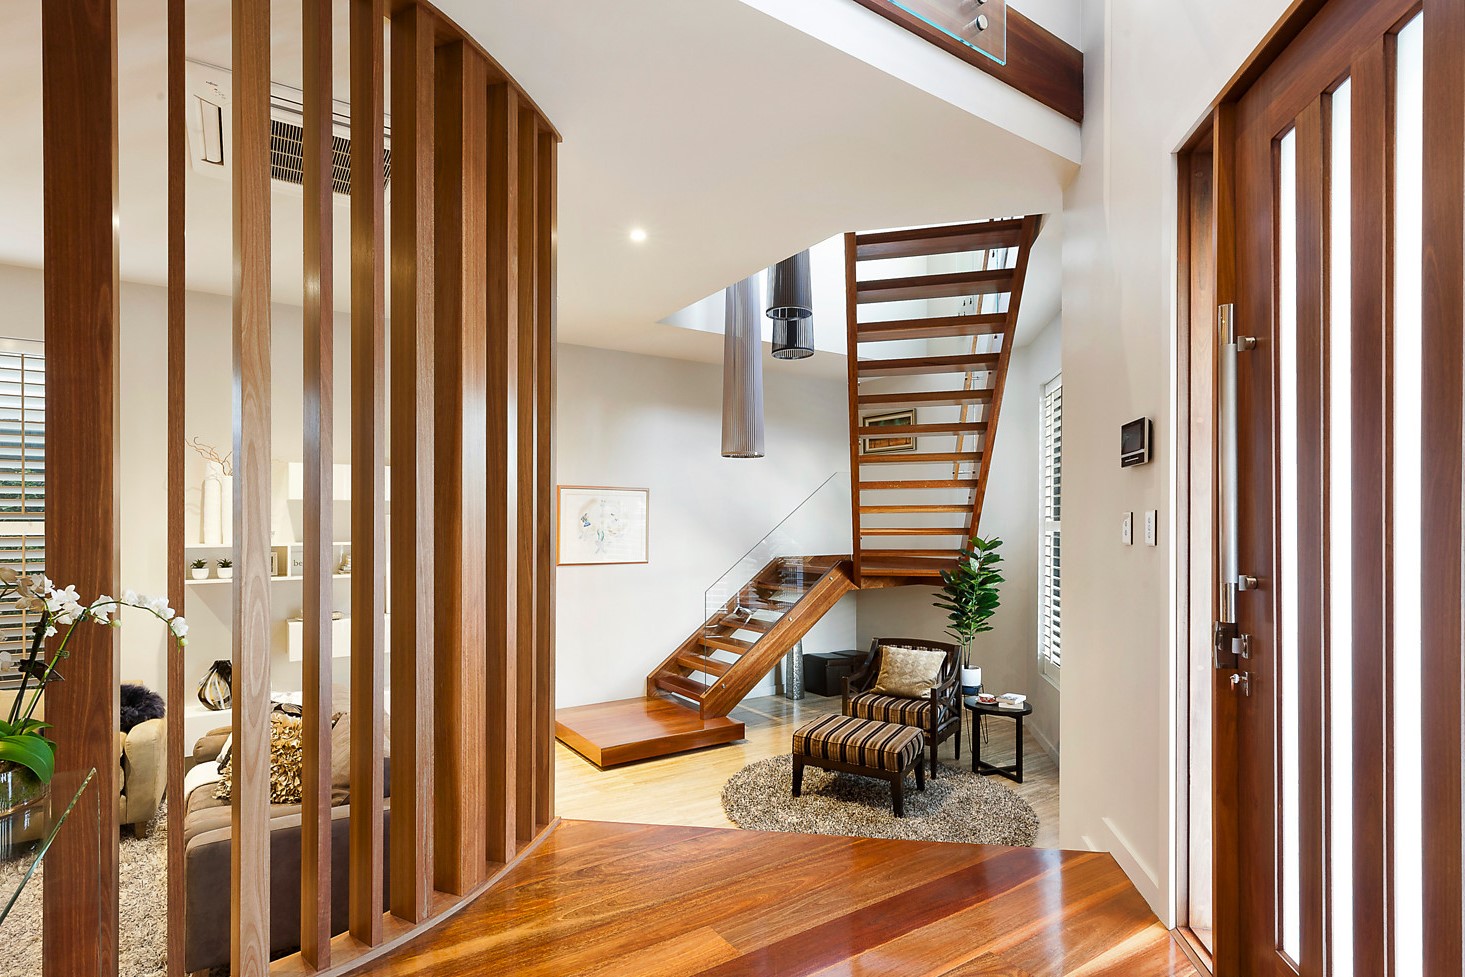 The staircase, often considered a mere functional element in a home,